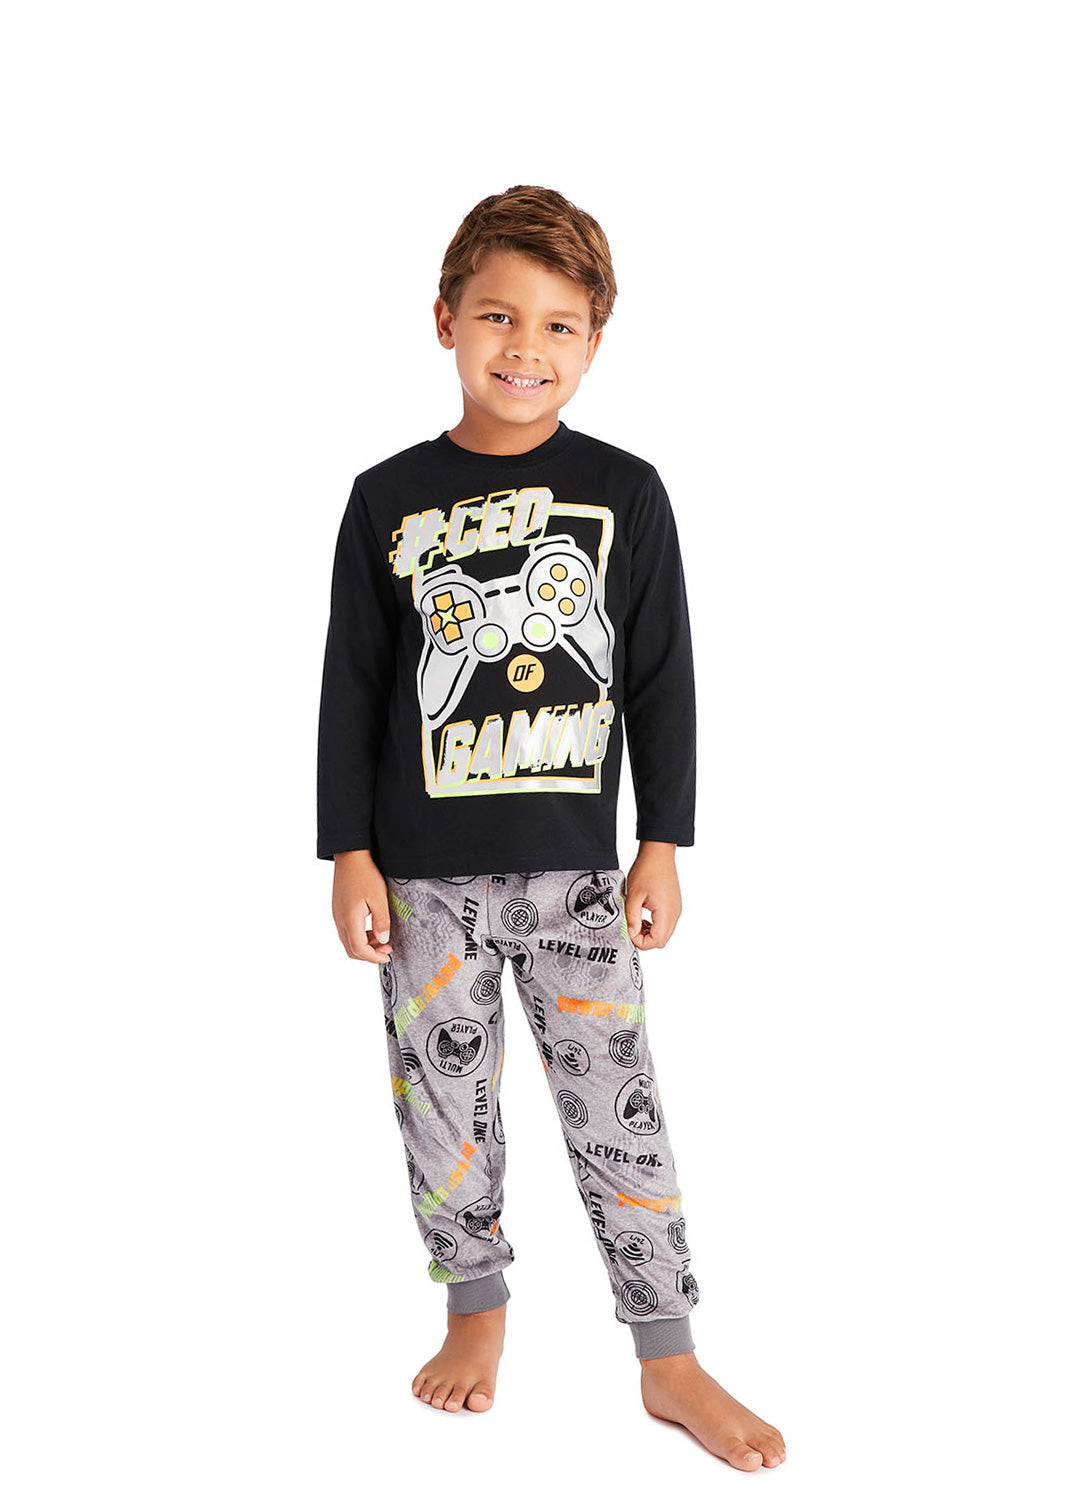 Little boy wearing Pajama Set with gamer print in black na d grey colours